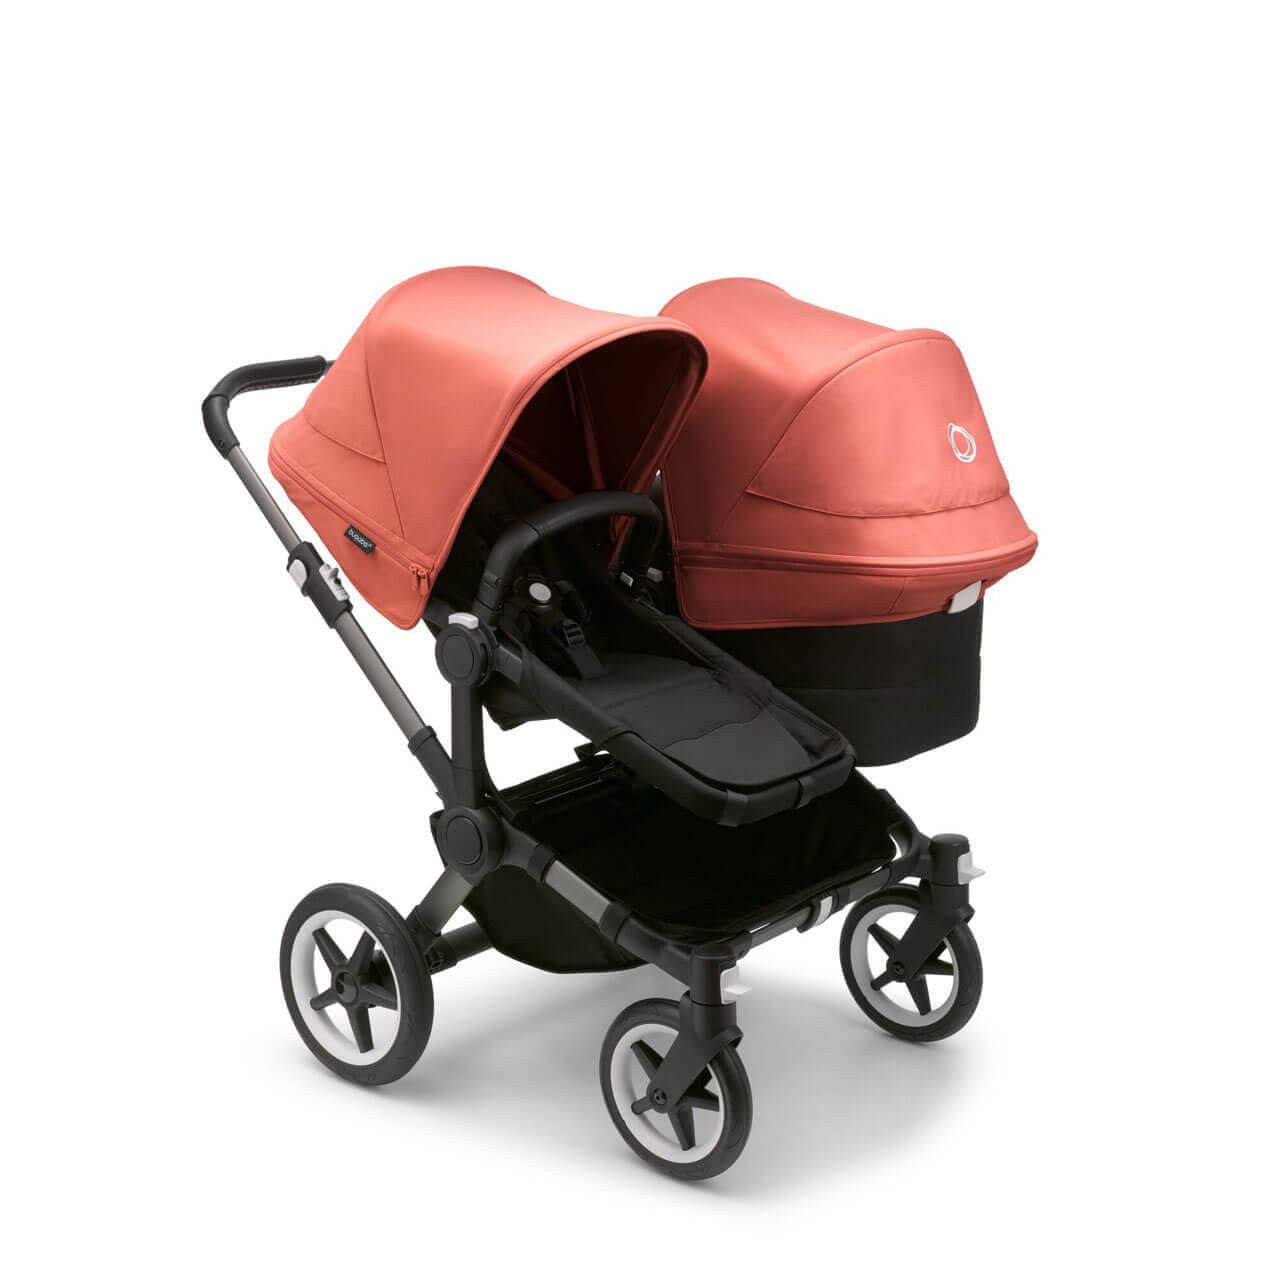 Bugaboo Donkey 5 Duo Pushchair on Graphite/Black Chassis - Choose Your Colour - Sunrise Red | For Your Little One